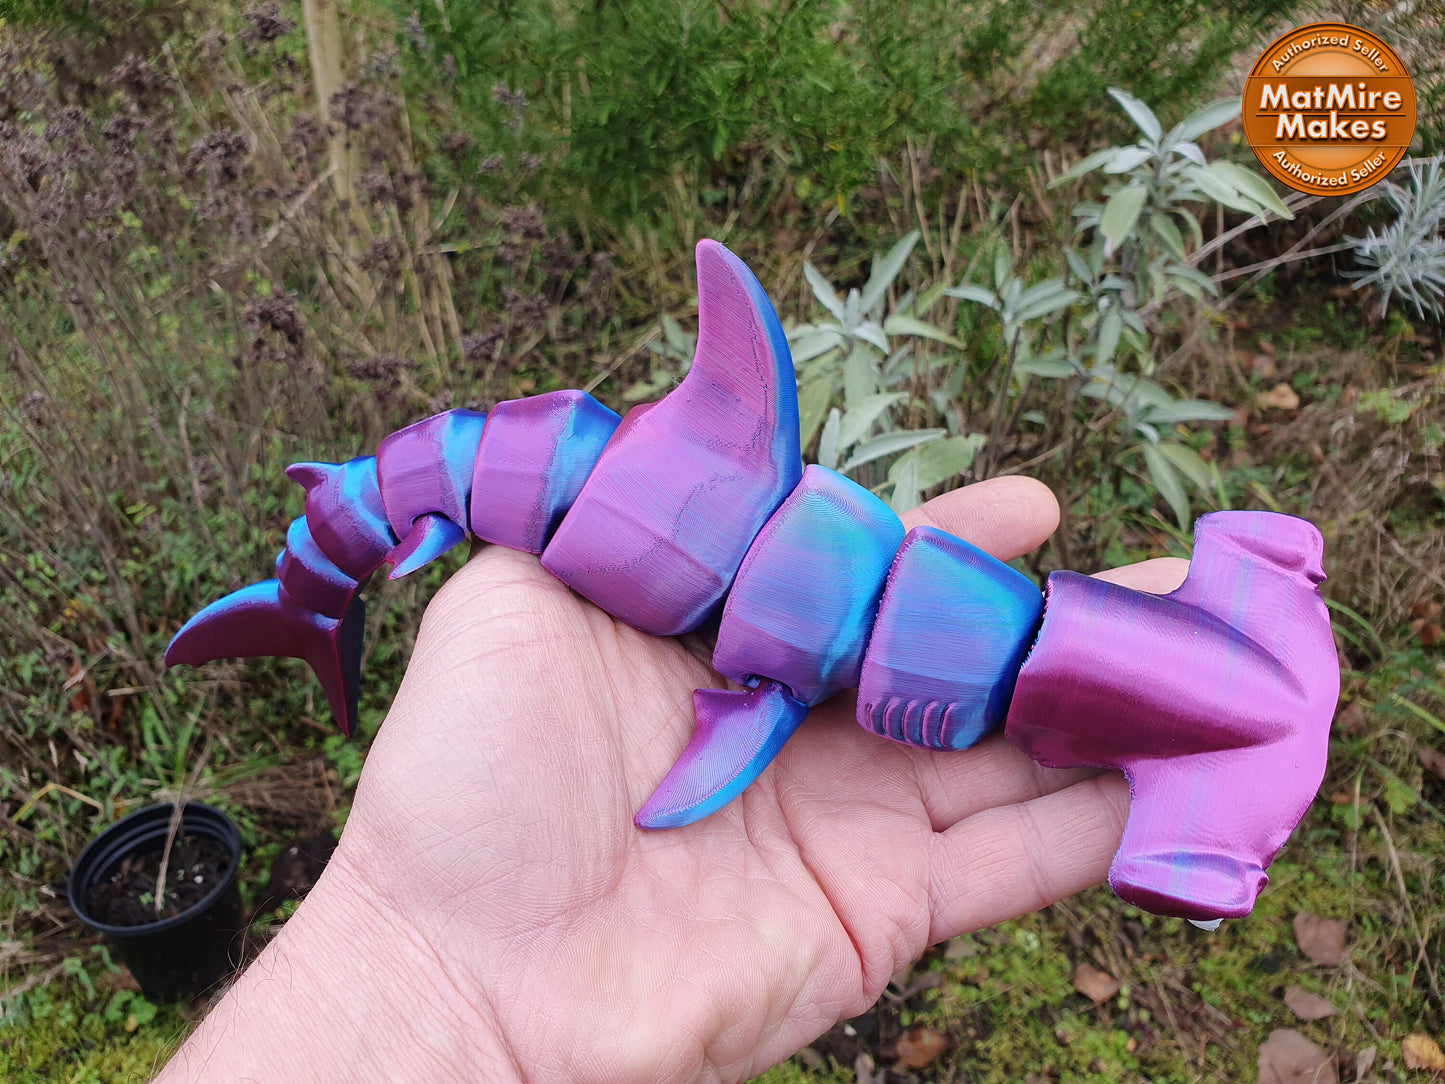 Hammerhead Shark - Articulated Flexible 3D Print. Professionally Hand painted finishing details